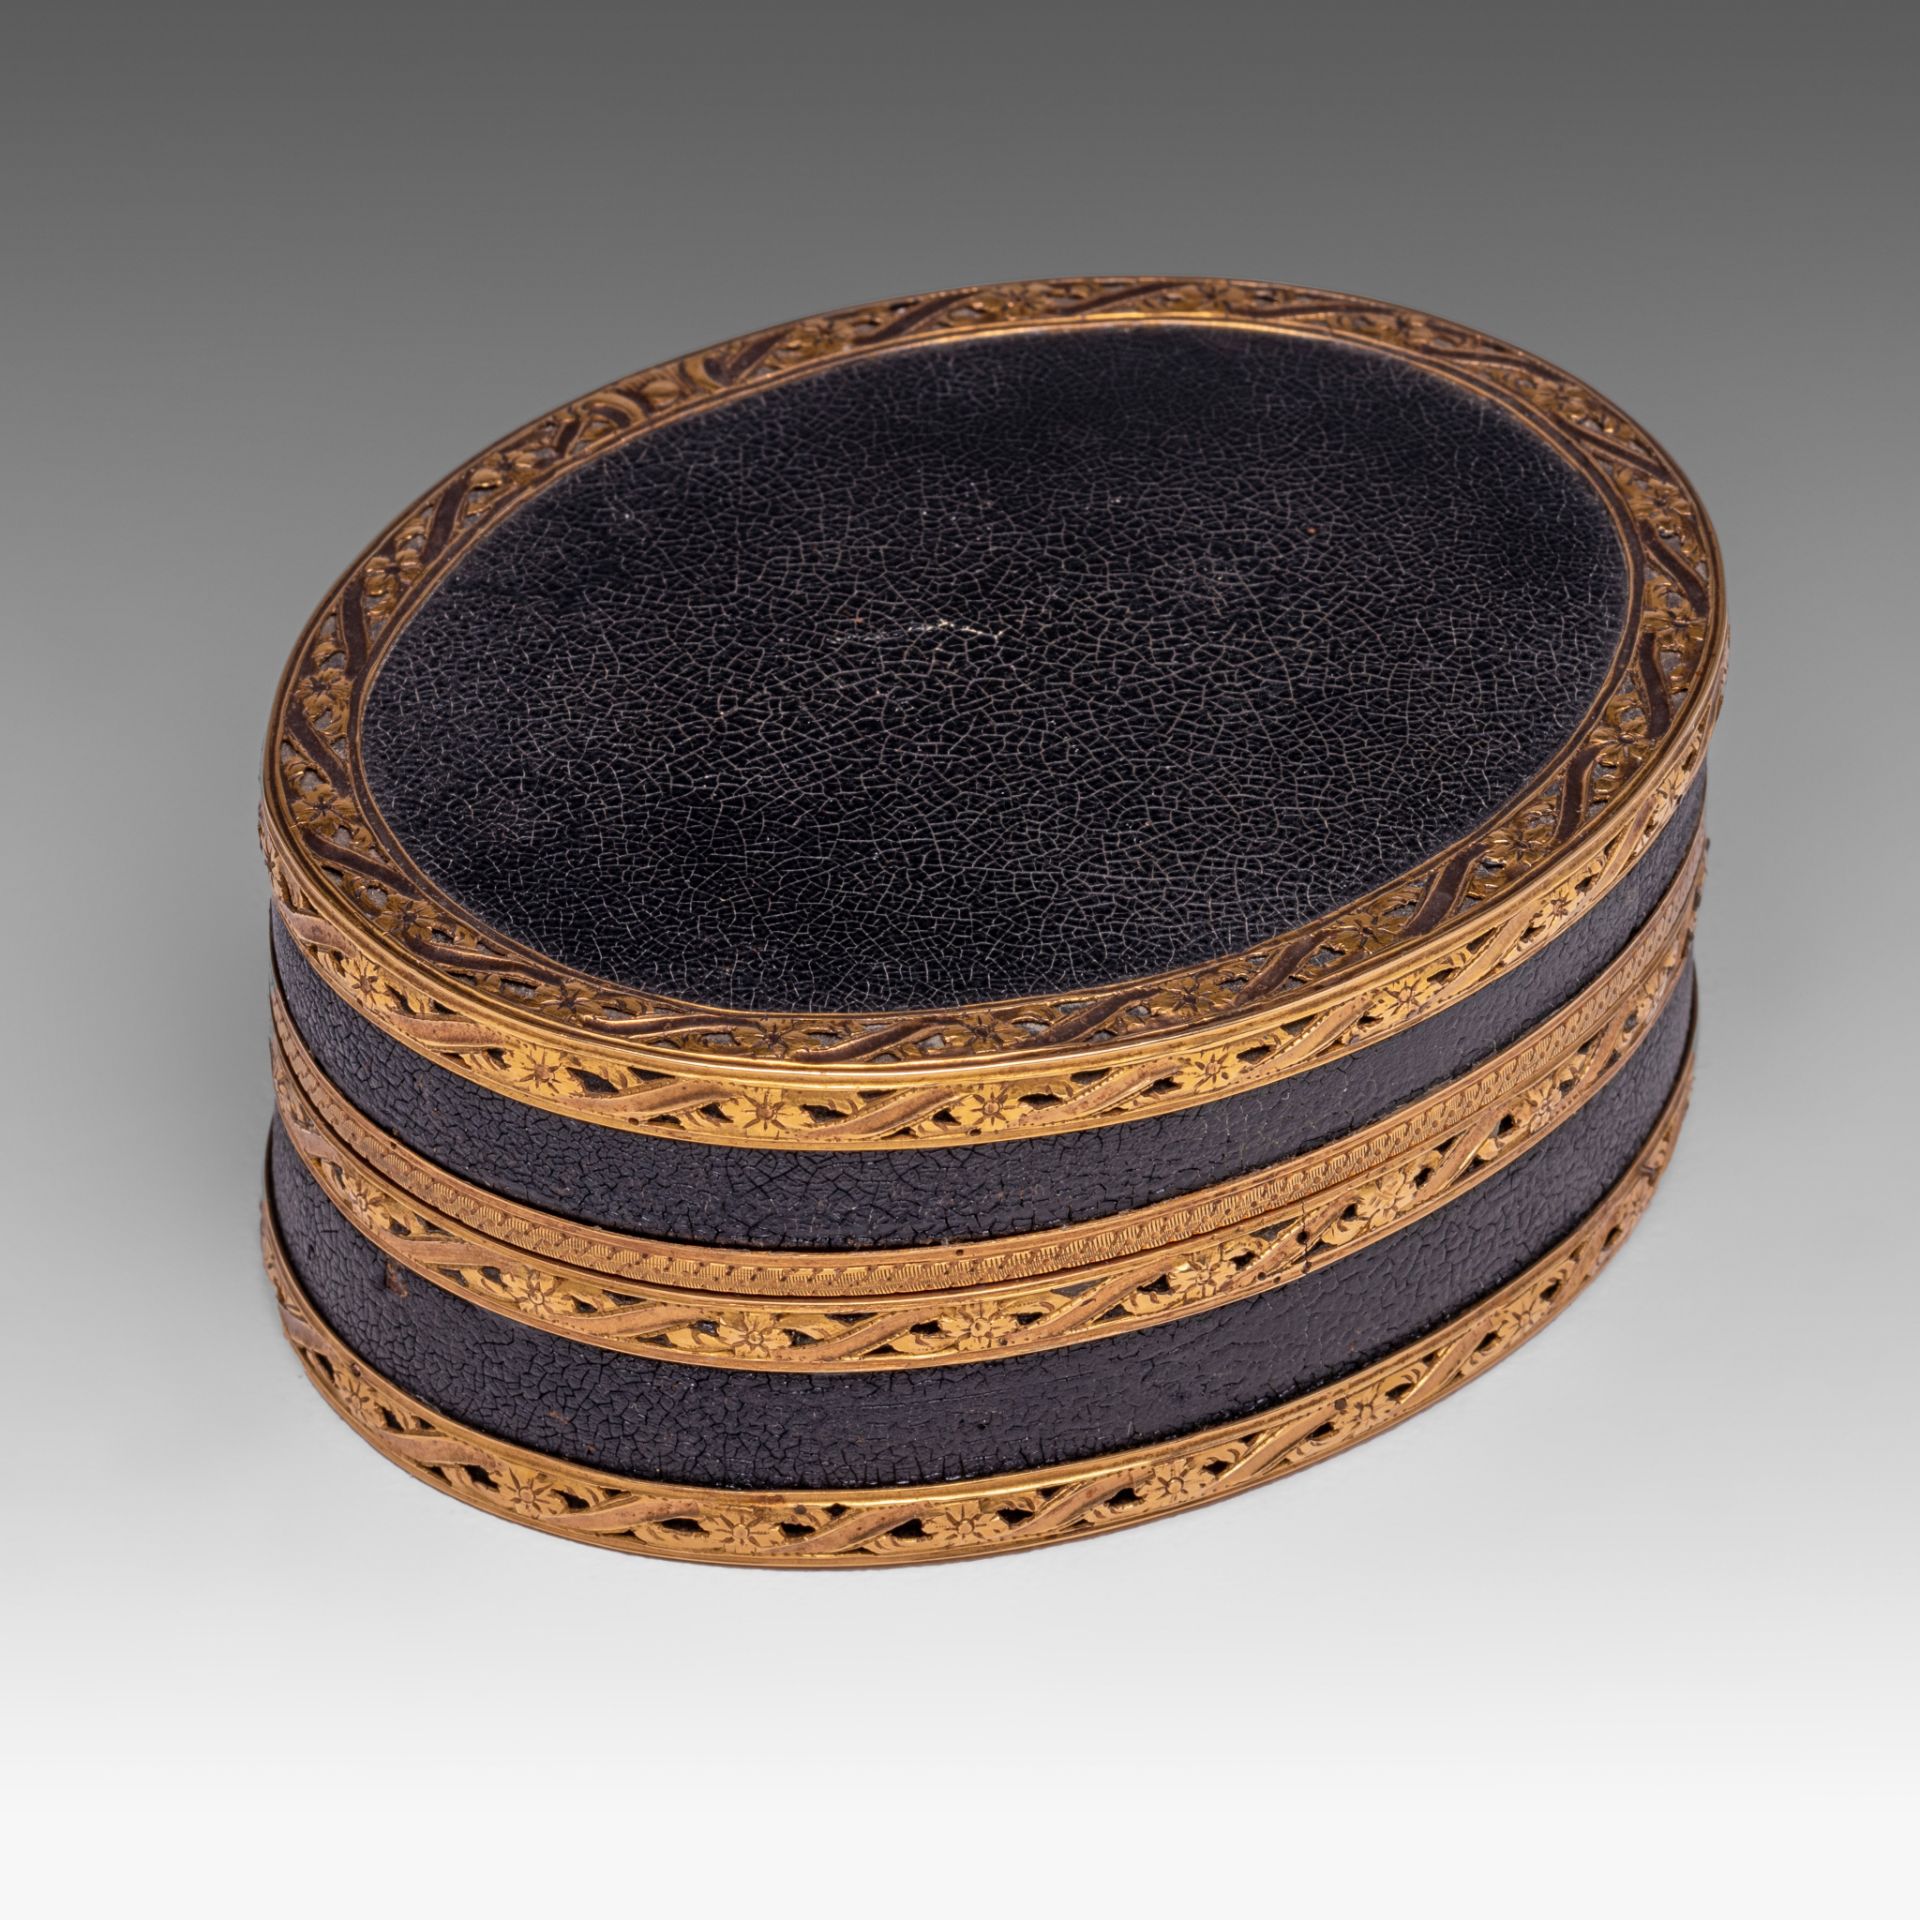 A fine Louis XVI leather and gold snuffbox, the inside with tortoiseshell, late 18thC, H 3,5 cm